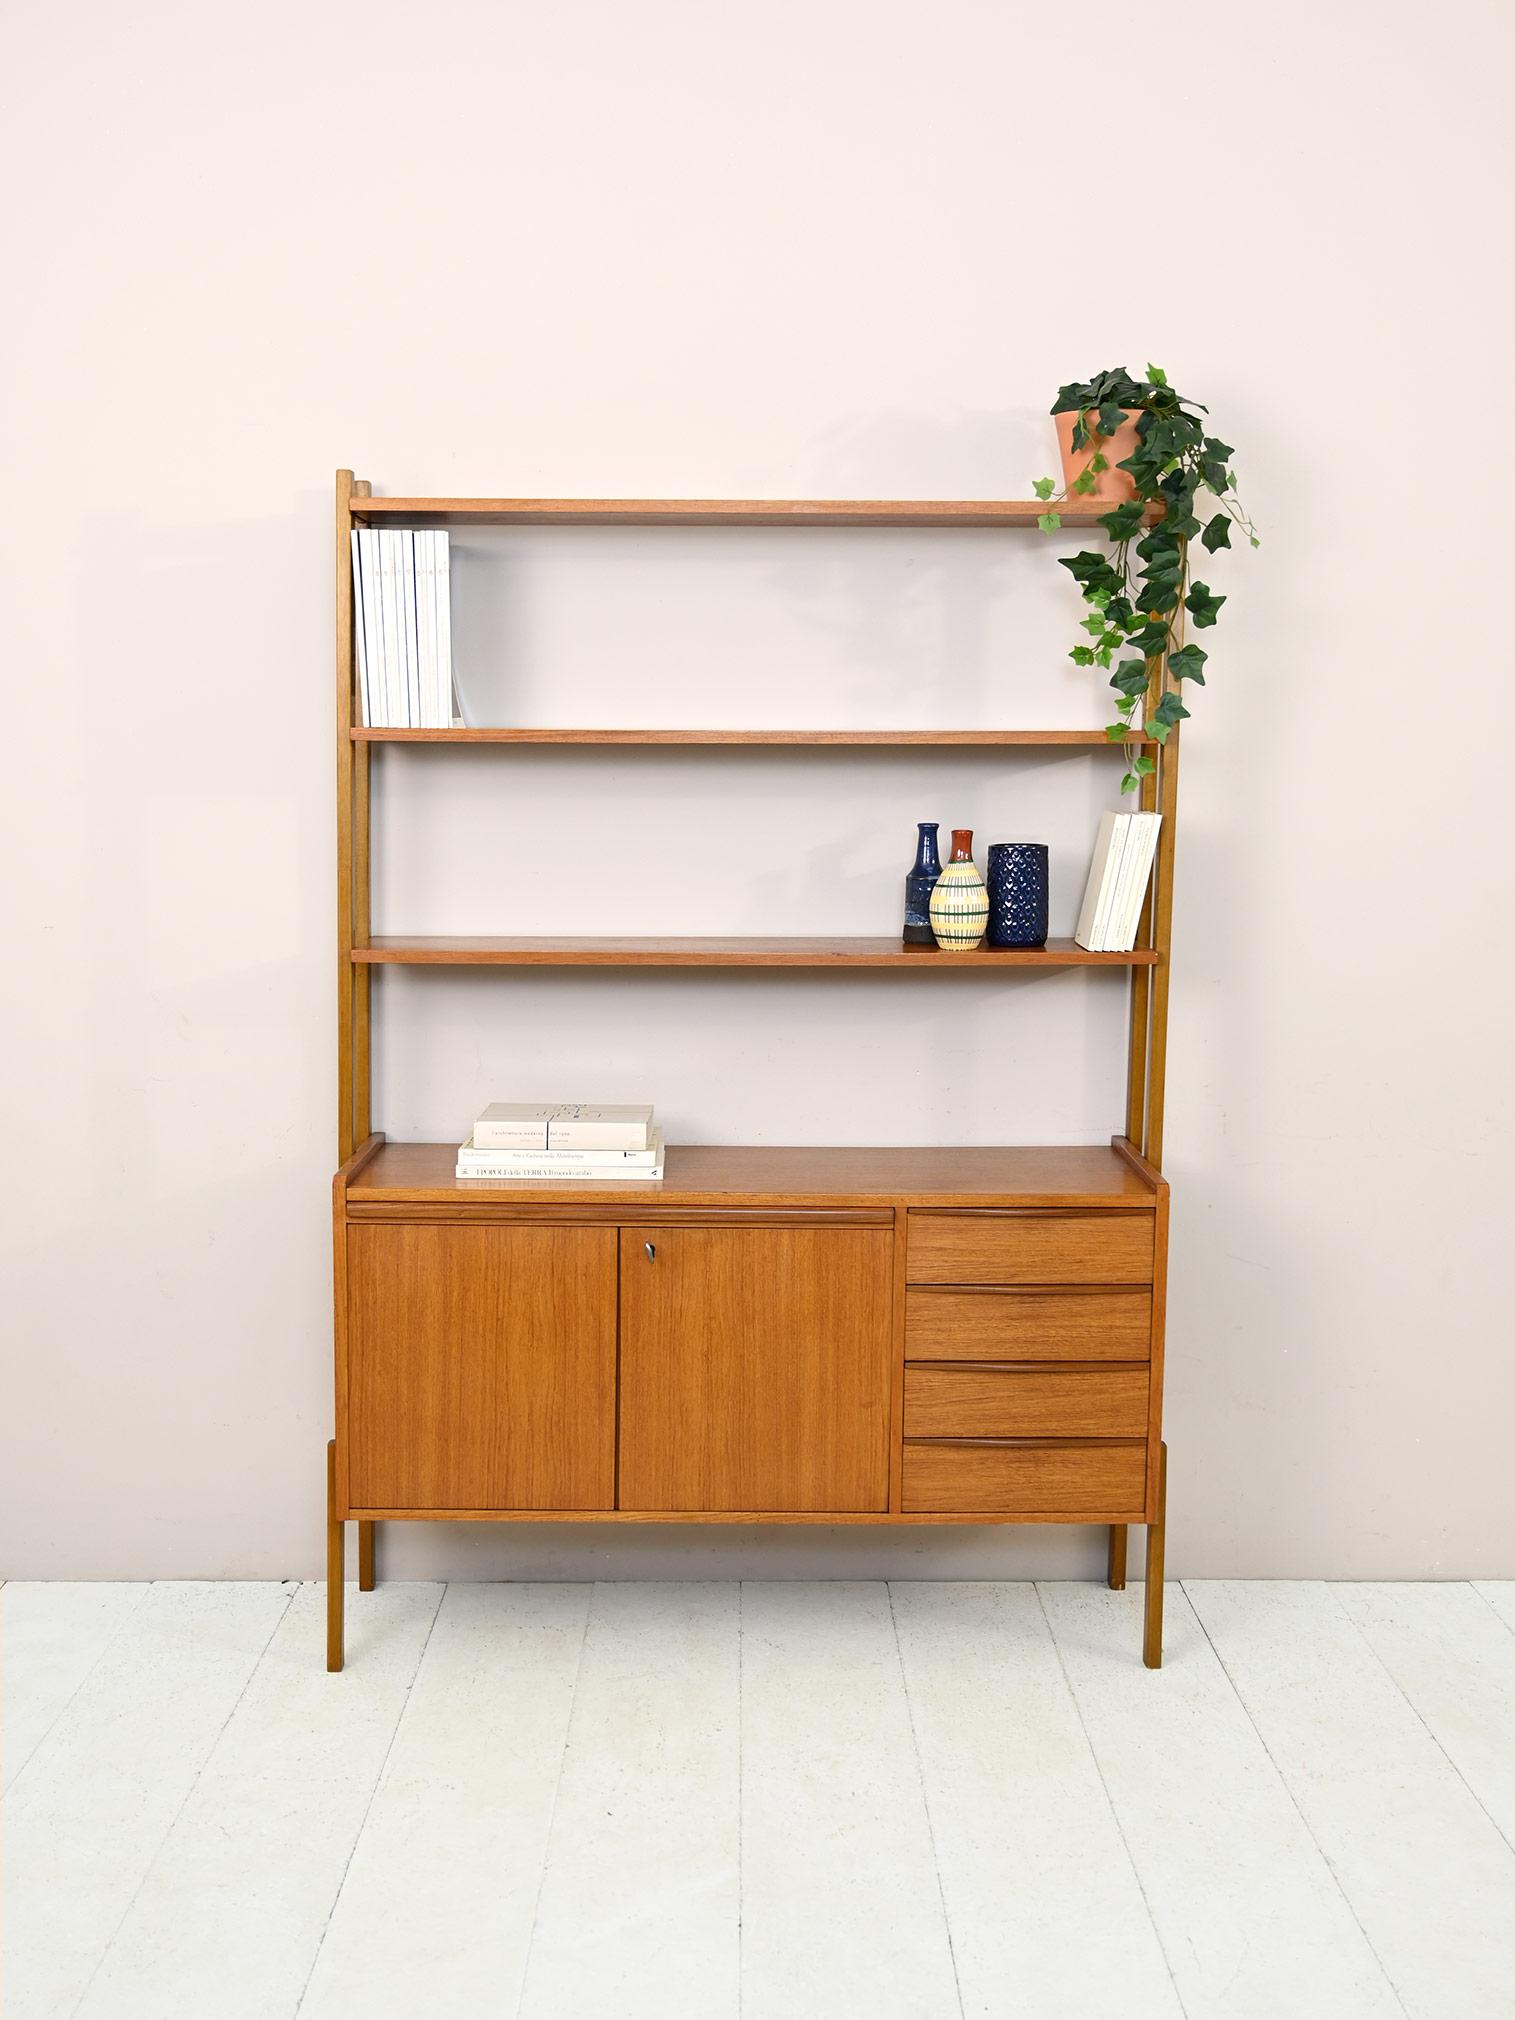 Vintage sideboard.

Swedish modern antique teak bookcase cabinet. 
The lower part is a small sideboard equipped with 4 drawers and a storage compartment with sliding doors and lock. The pull-out top allows it to be transformed into a small desk